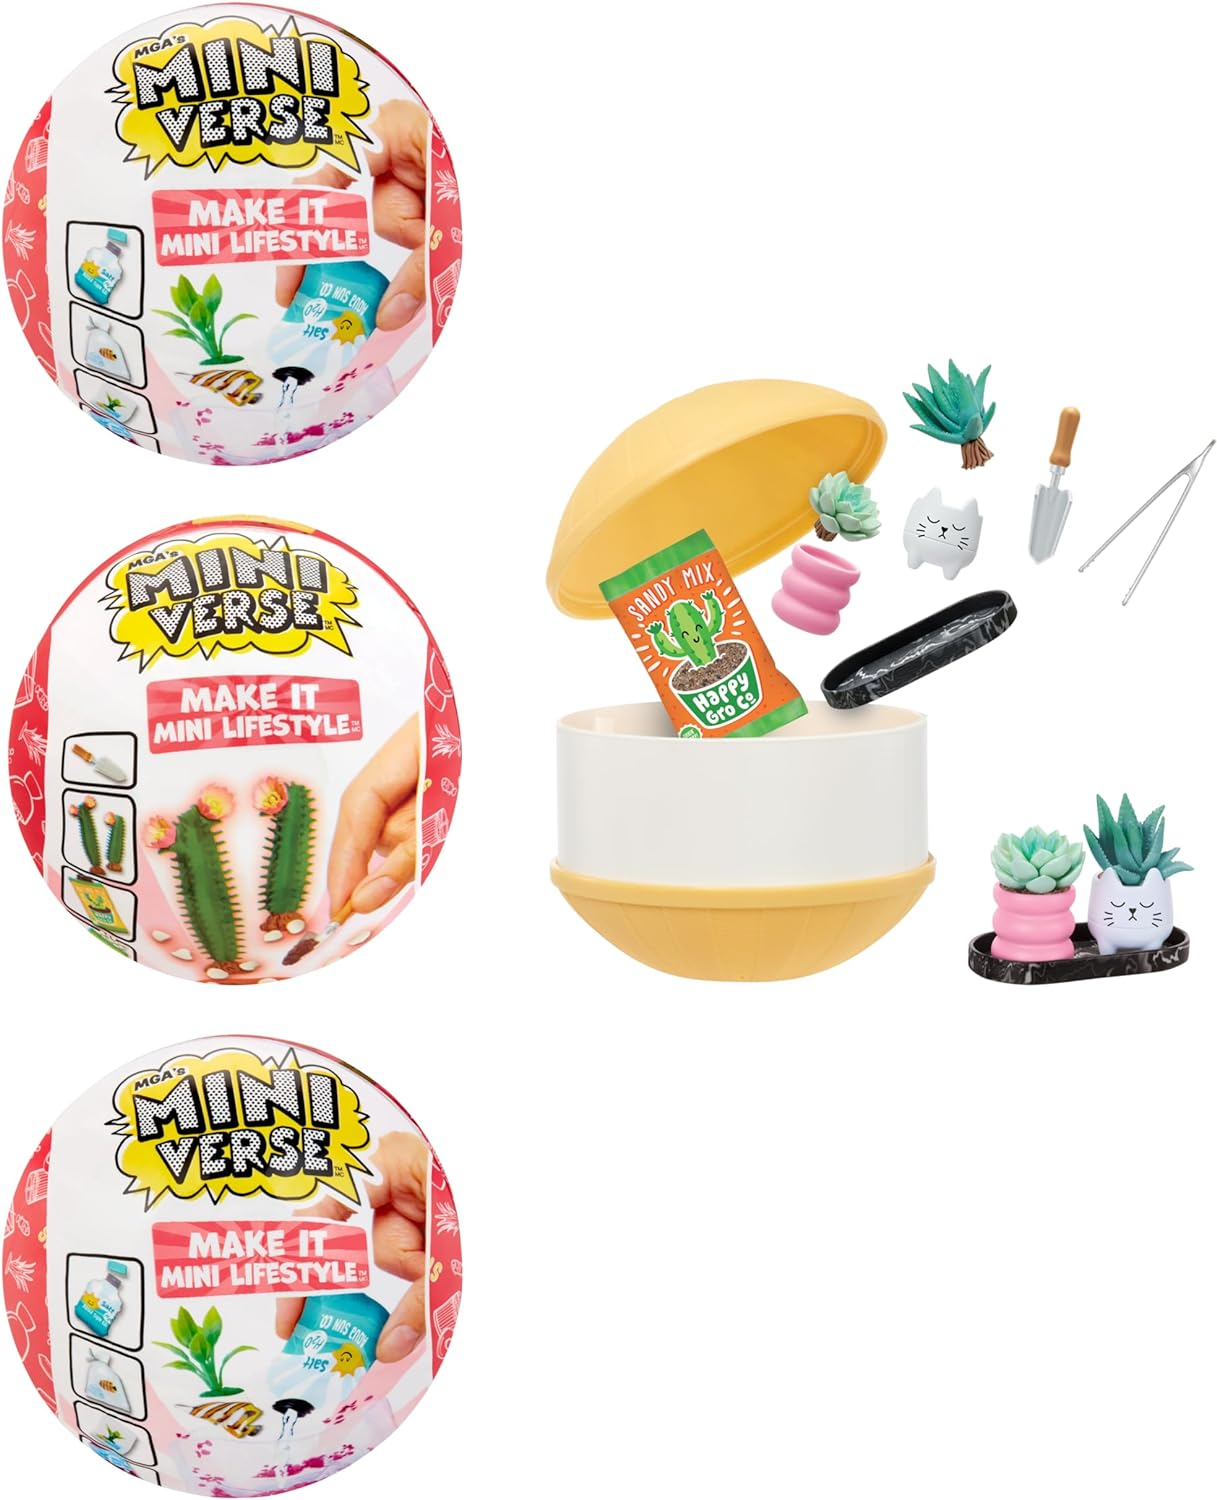 Mga'S Miniverse Make It Mini Lifestyle Series 1 - Succulents (3 Pack) - 3 Mini  Collectibles in Blind Packaging - DIY, Resin Play, Replica Food - NOT EDIBLE  - Suitable for Kids and Collectors Ages 8+